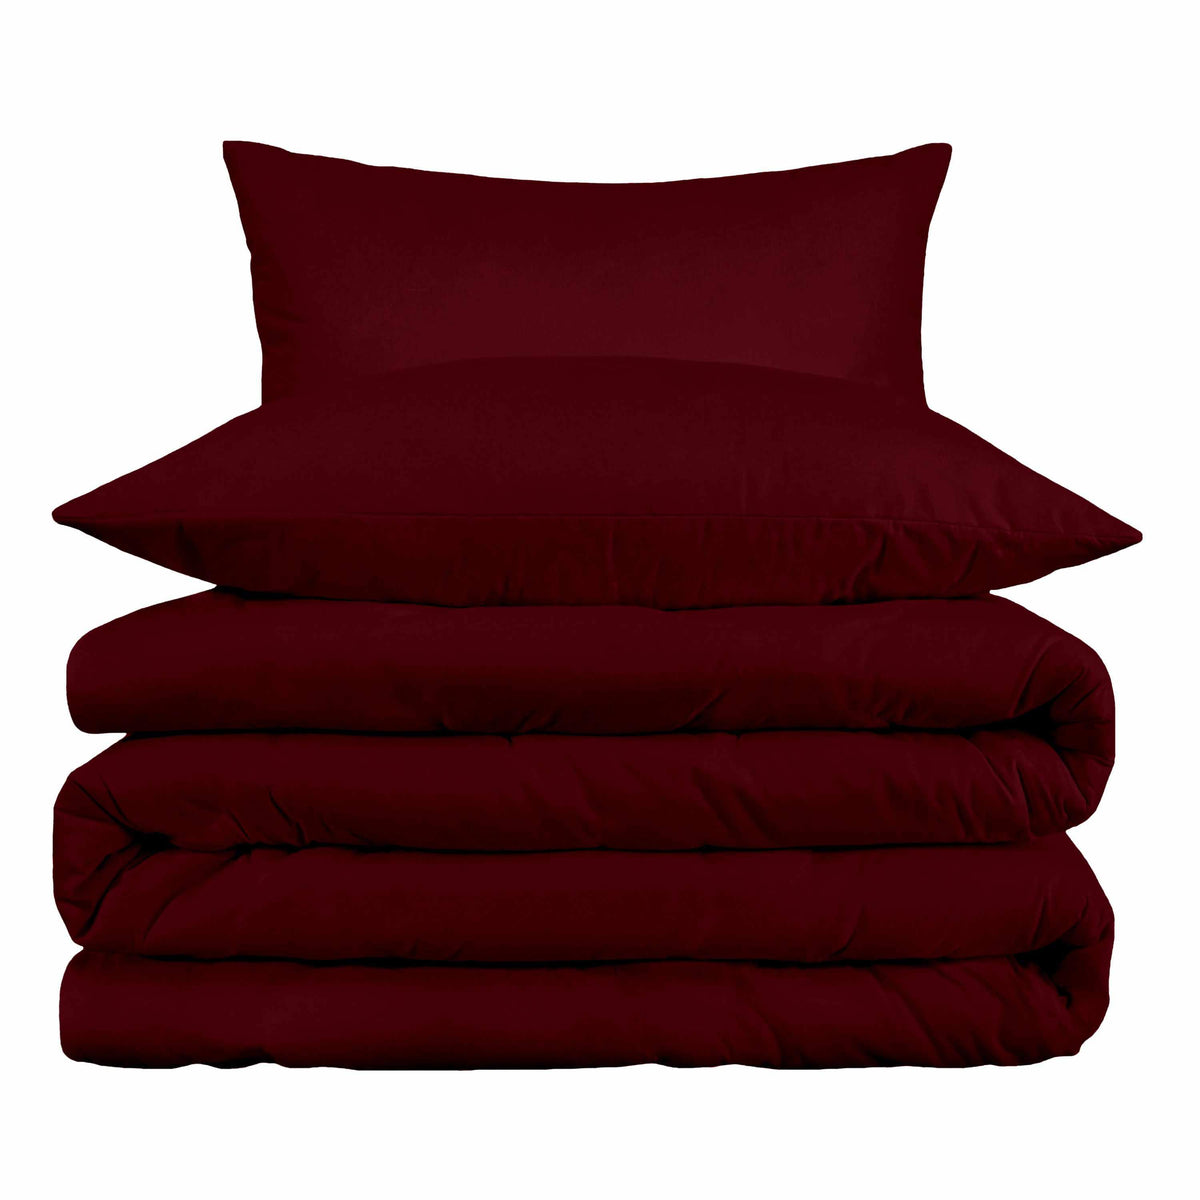 Egyptian Cotton Solid All-Season Duvet Cover Set with Button Closure-Duvet Cover Set by Superior-Home City Inc